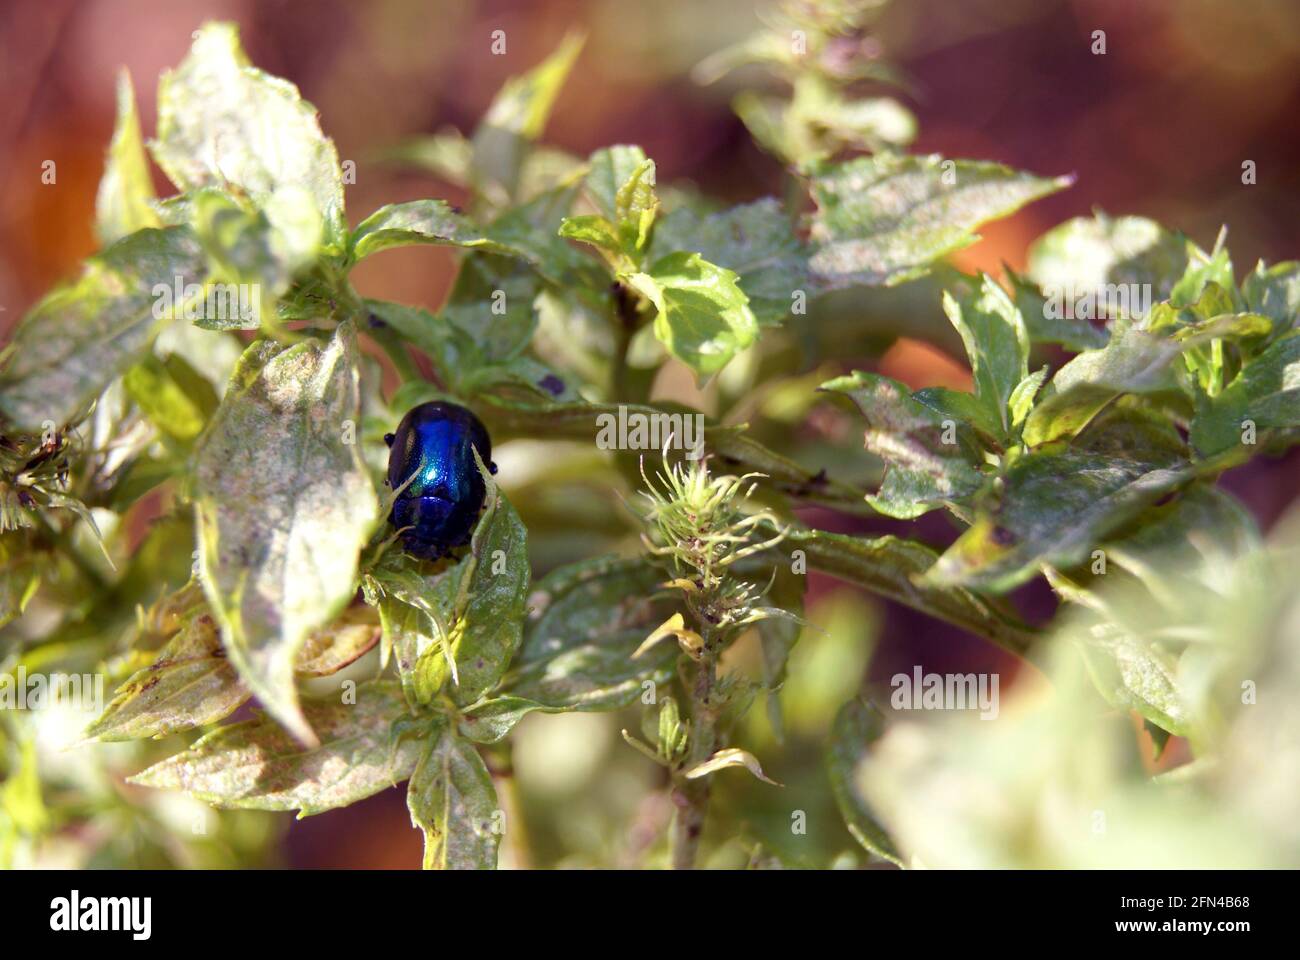 Gorgeous blue beetle rests among the leaves. Shiny insect lives in its habitat. Nature and natural beauty. Stock Photo